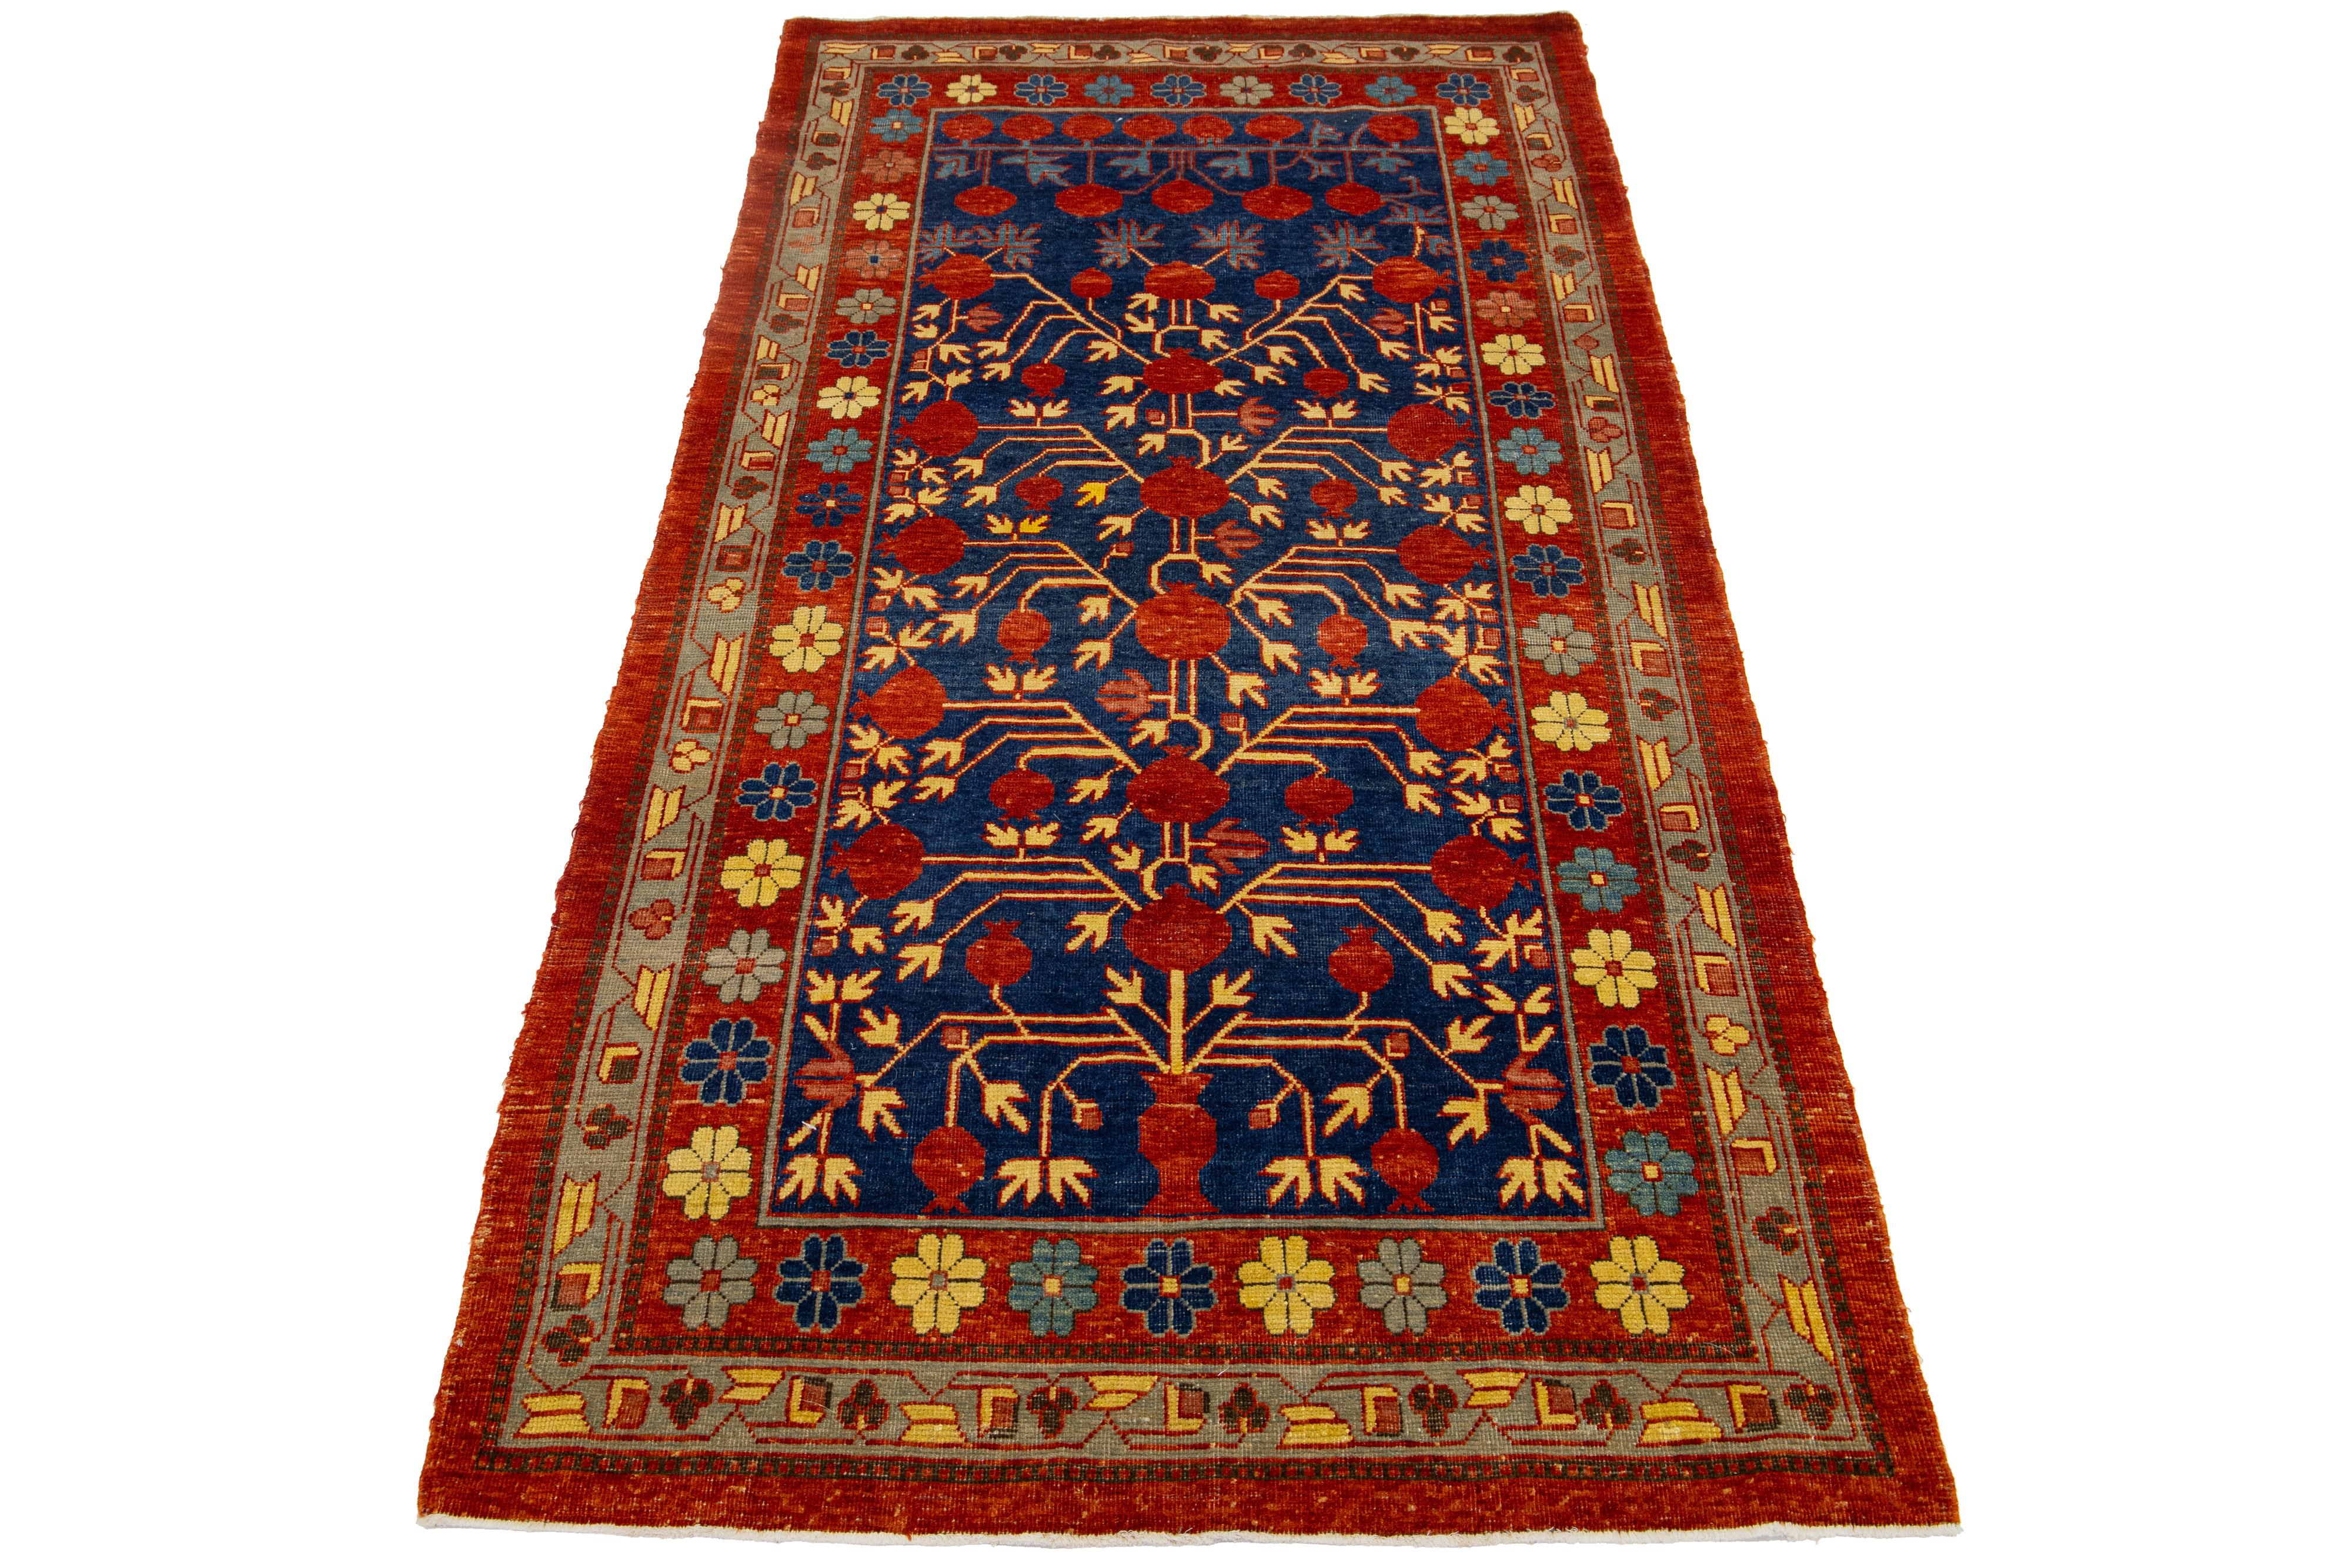 Beautiful modern Khotan tone-on-tone hand-knotted wool rug with a navy blue color field. This piece has beige and rust accents all over a gorgeous interconnected pomegranate rosette design.

This rug measures 3'8